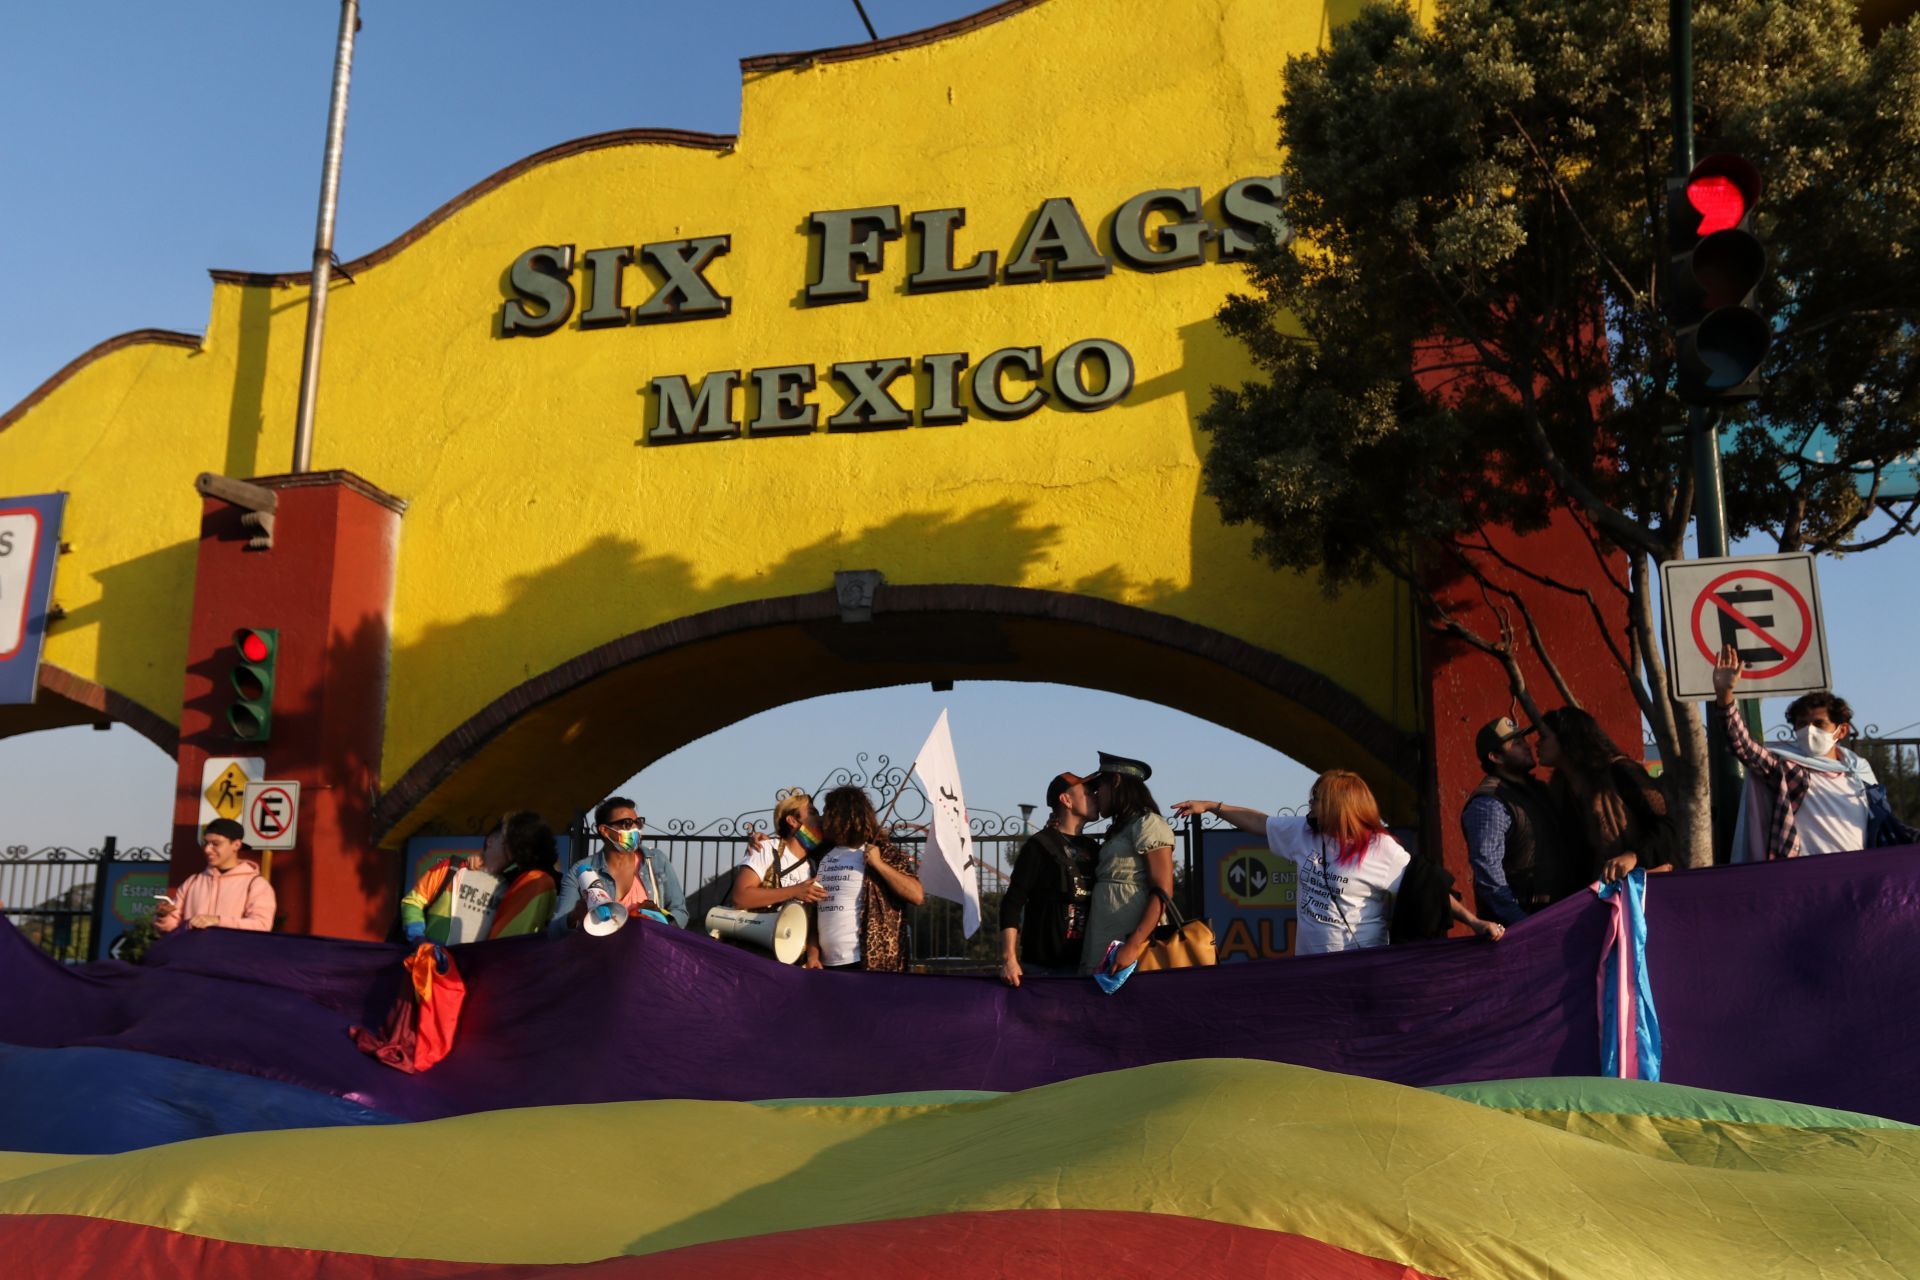 Amusement park personnel were also accused of allegedly discriminating against a homosexual couple for kissing (ANDREA MURCIA / CUARTOSCURO.COM)